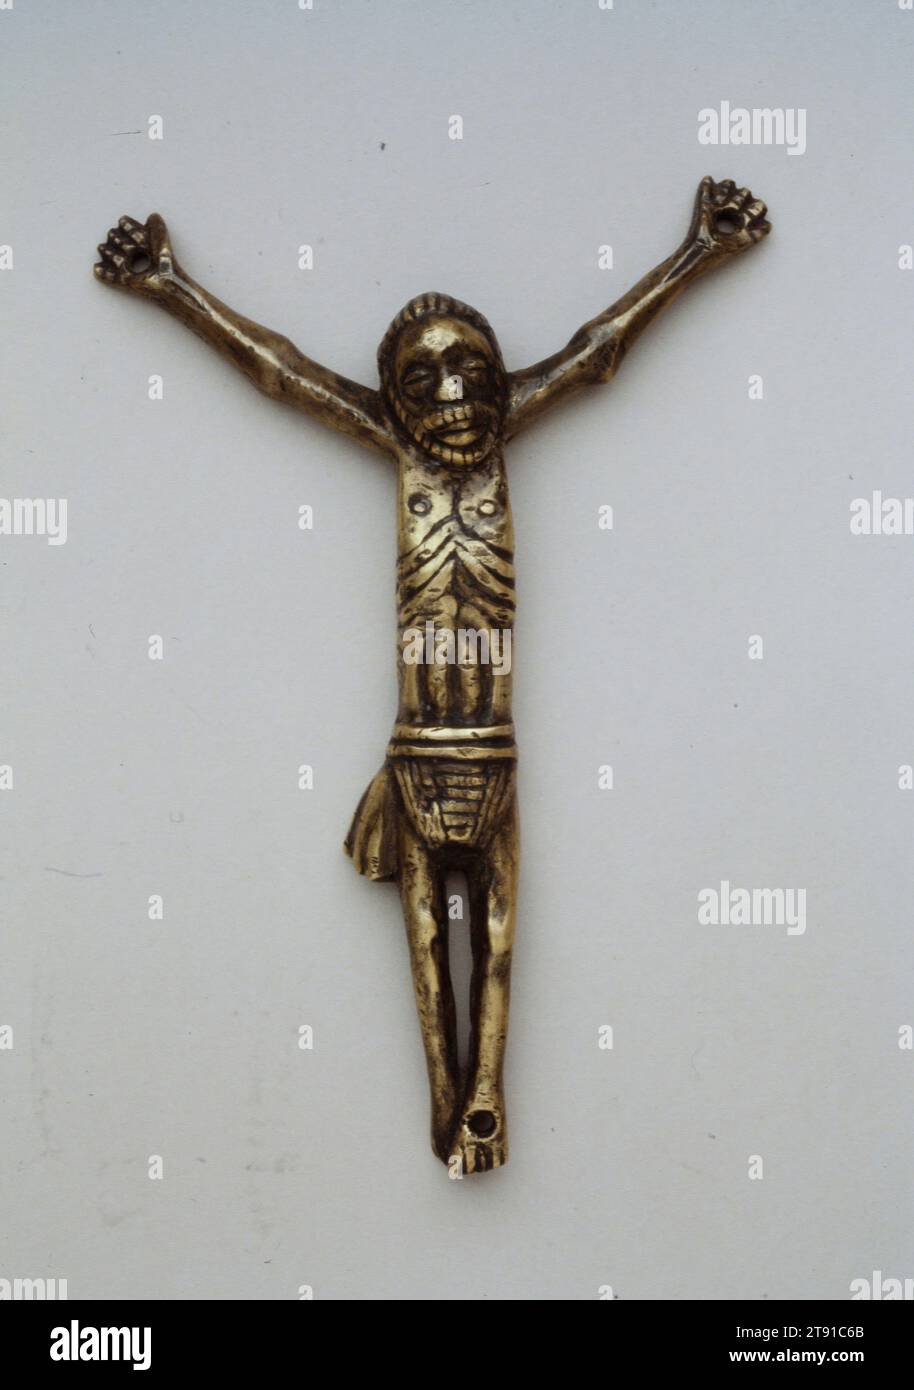 Crucifix, 19th century, 5 1/8 x 5 1/4 in. (13 x 13.3 cm) (figure), Brass, Democratic Republic of the Congo, 19th century, The Kongo kingdom flourished from 1450 to 1700 as a vast, centralized African state on the Atlantic coast south of the equator. Christianity was adopted as a state religion at the end of the 15th century, and over the next 200 years Portuguese missionaries introduced crucifixes, devotional objects, and figures of saints, all of which were copied by Kongo artists. Incorporated into local religious practices that combined the two traditions, objects like this small crucifix Stock Photo